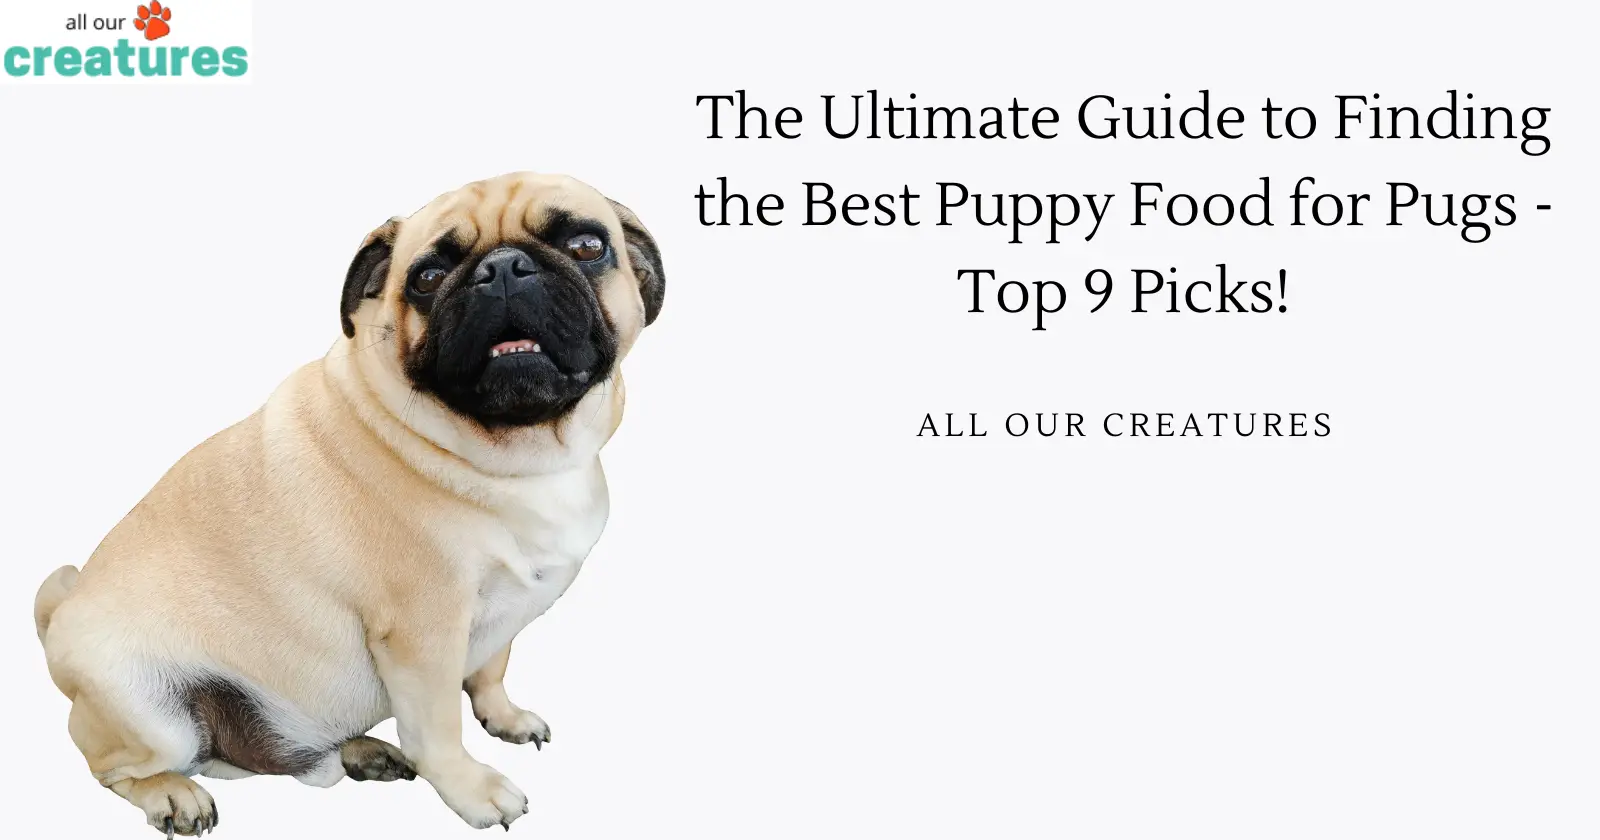 The Ultimate Guide to Finding the Best Puppy Food for Pugs - Top 9 Picks!